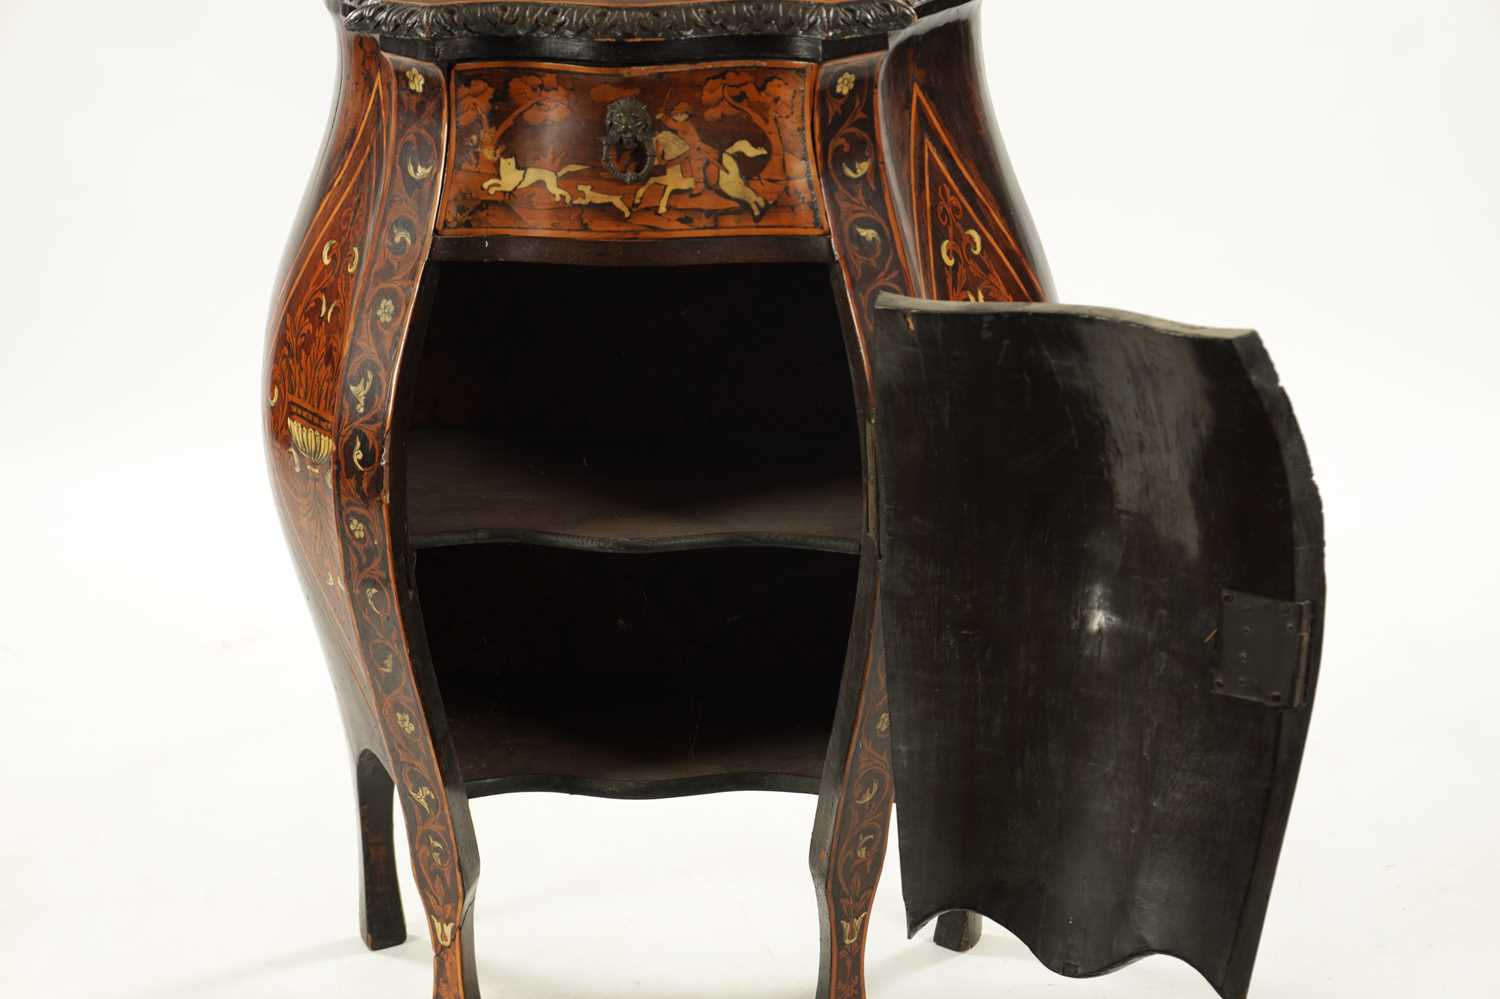 AN EARLY 18TH CENTURY ITALIAN MARQUETRY AND BONE INLAID COMMODE OF SMALL SIZE - Image 7 of 9